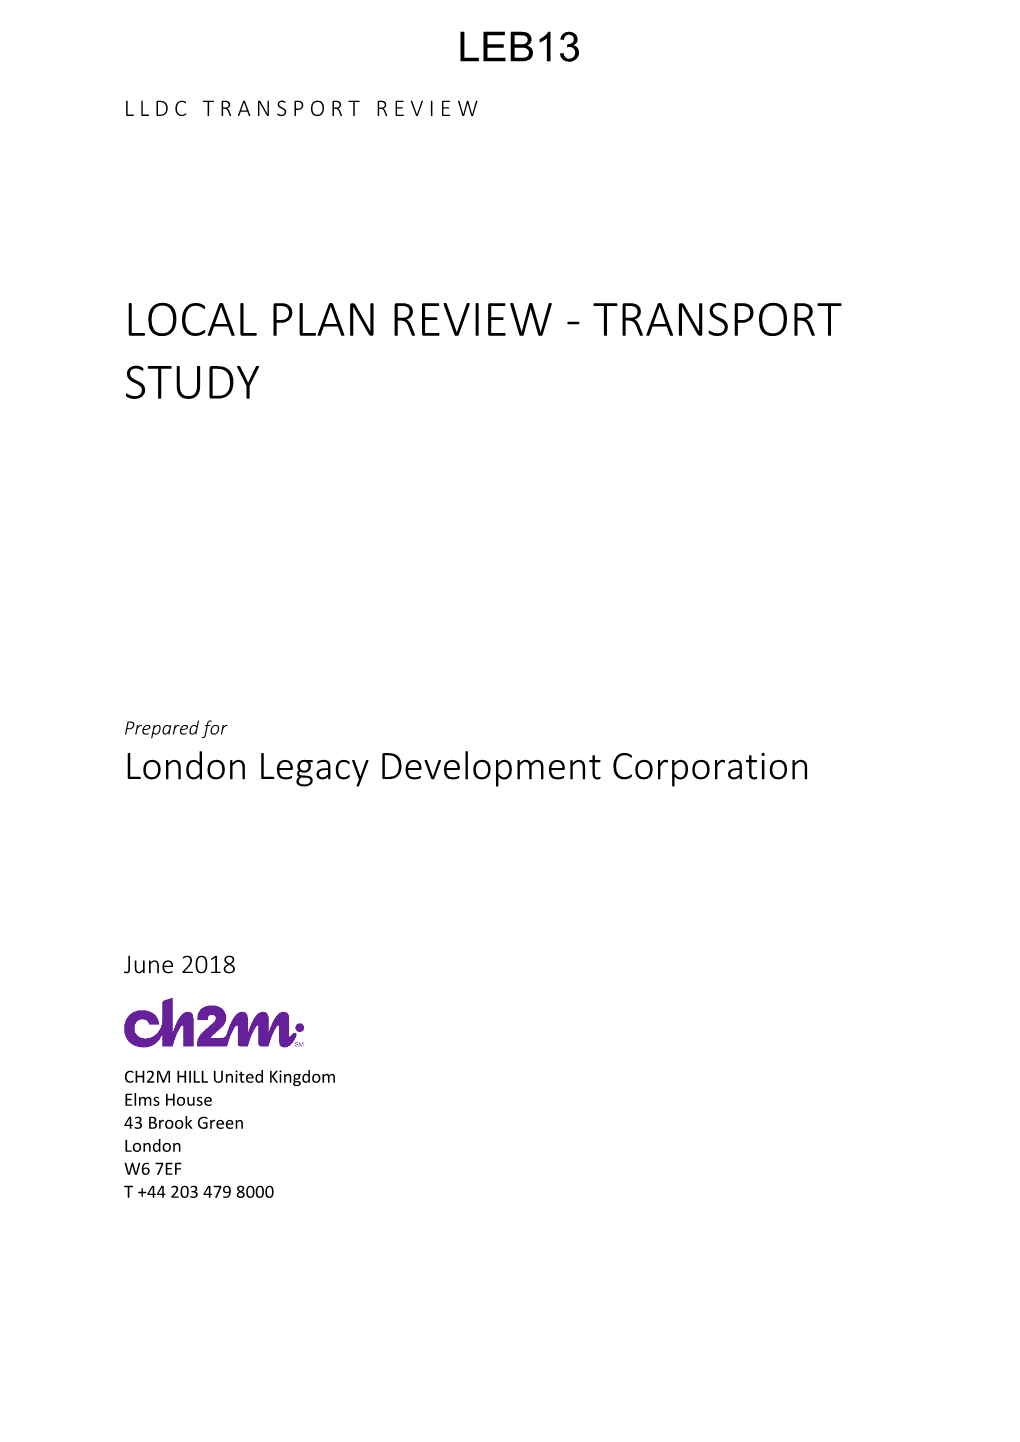 Local Plan Review - Transport Study